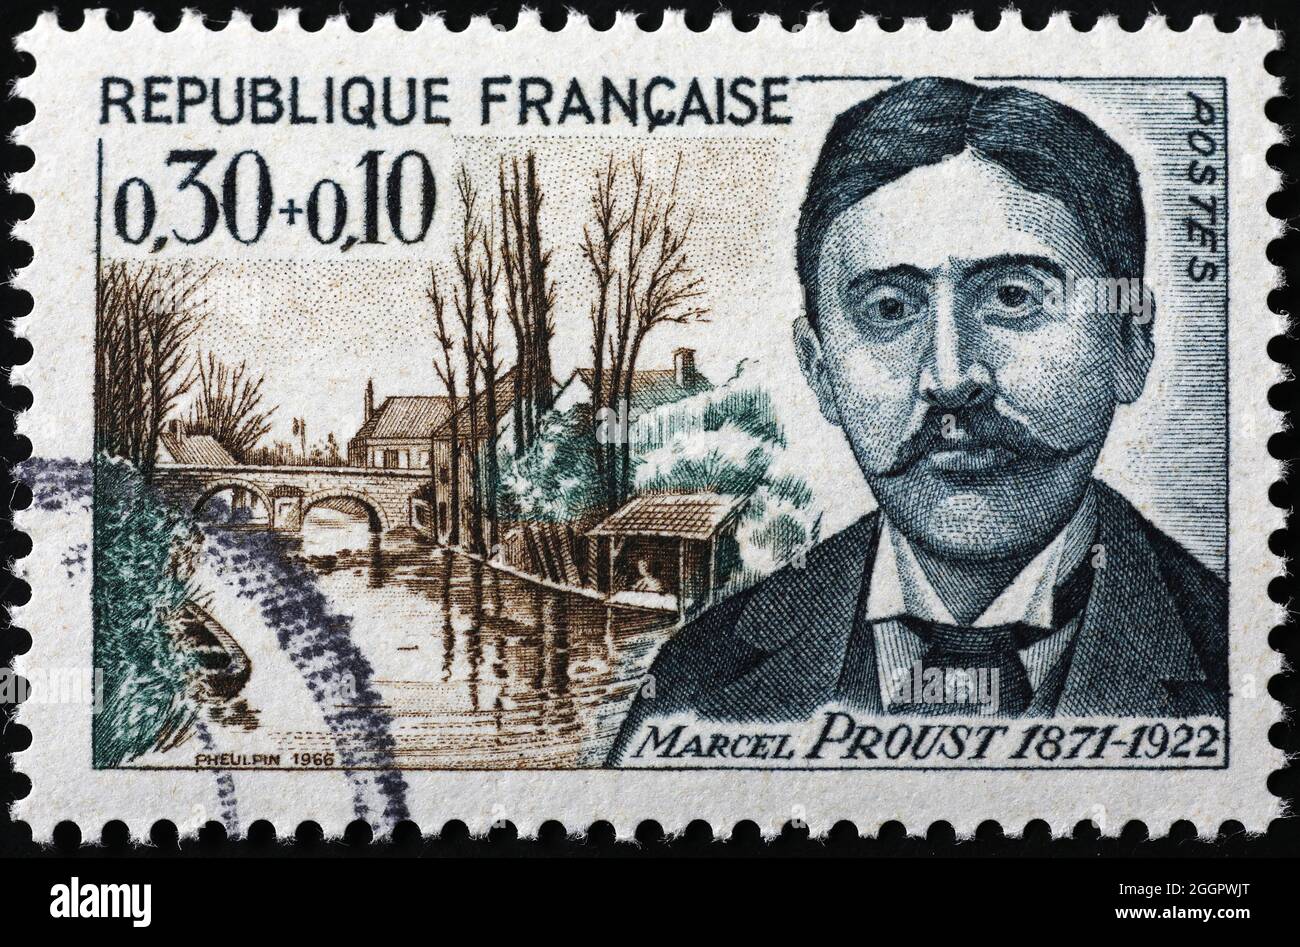 Marcel Proust on old french postage stamp Stock Photo